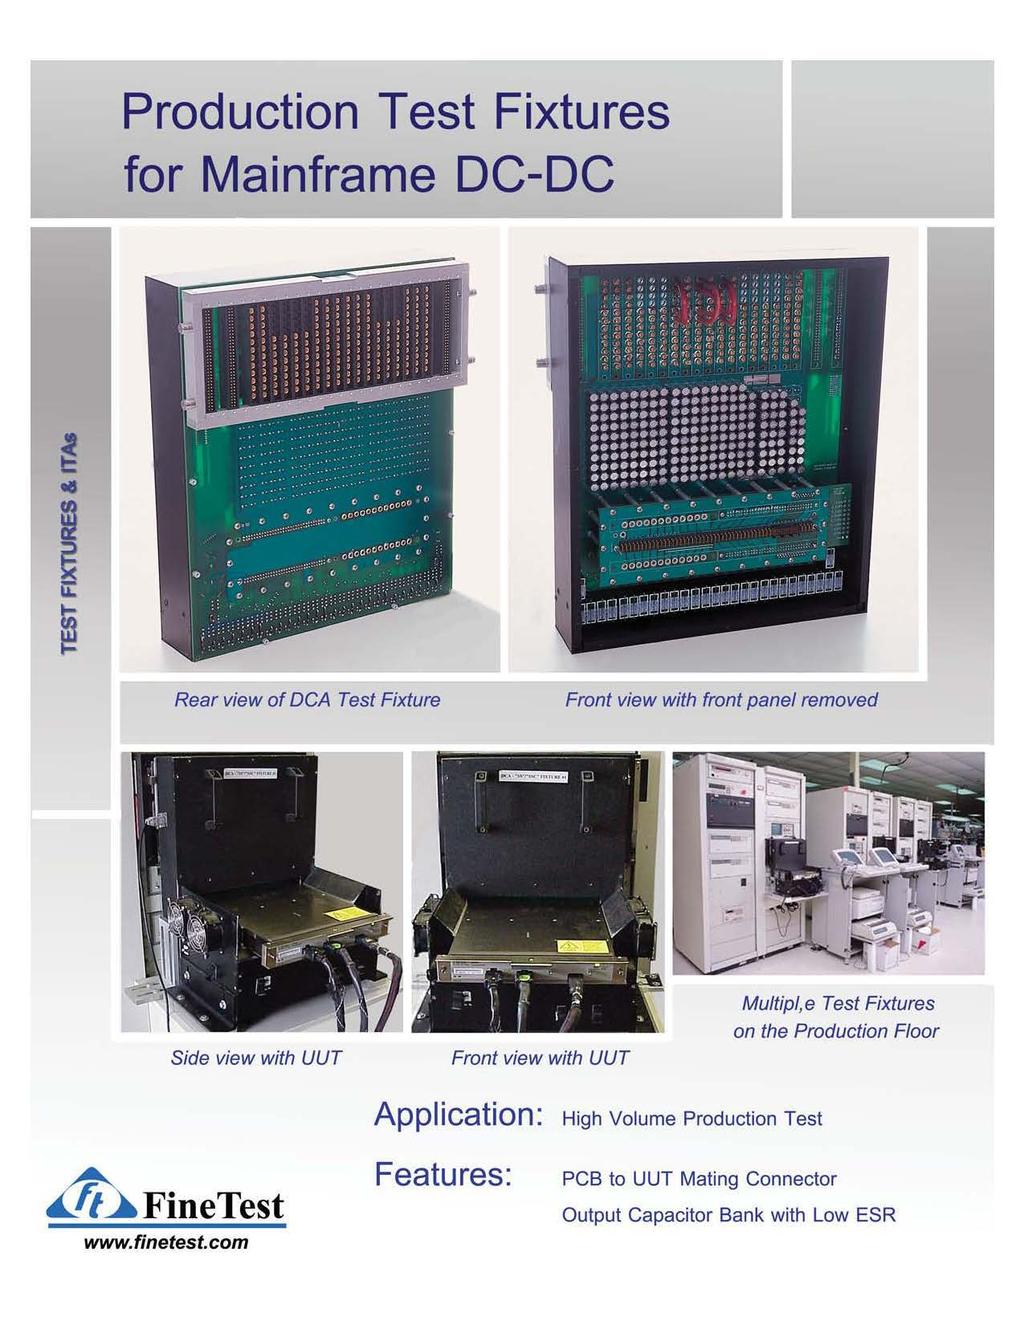 Production Test Fixtures for Mainframe DC-DC Rear view of DCA Test Fixture Front view with front panel removed Side view with UUT Front view with UUT Multipl,e